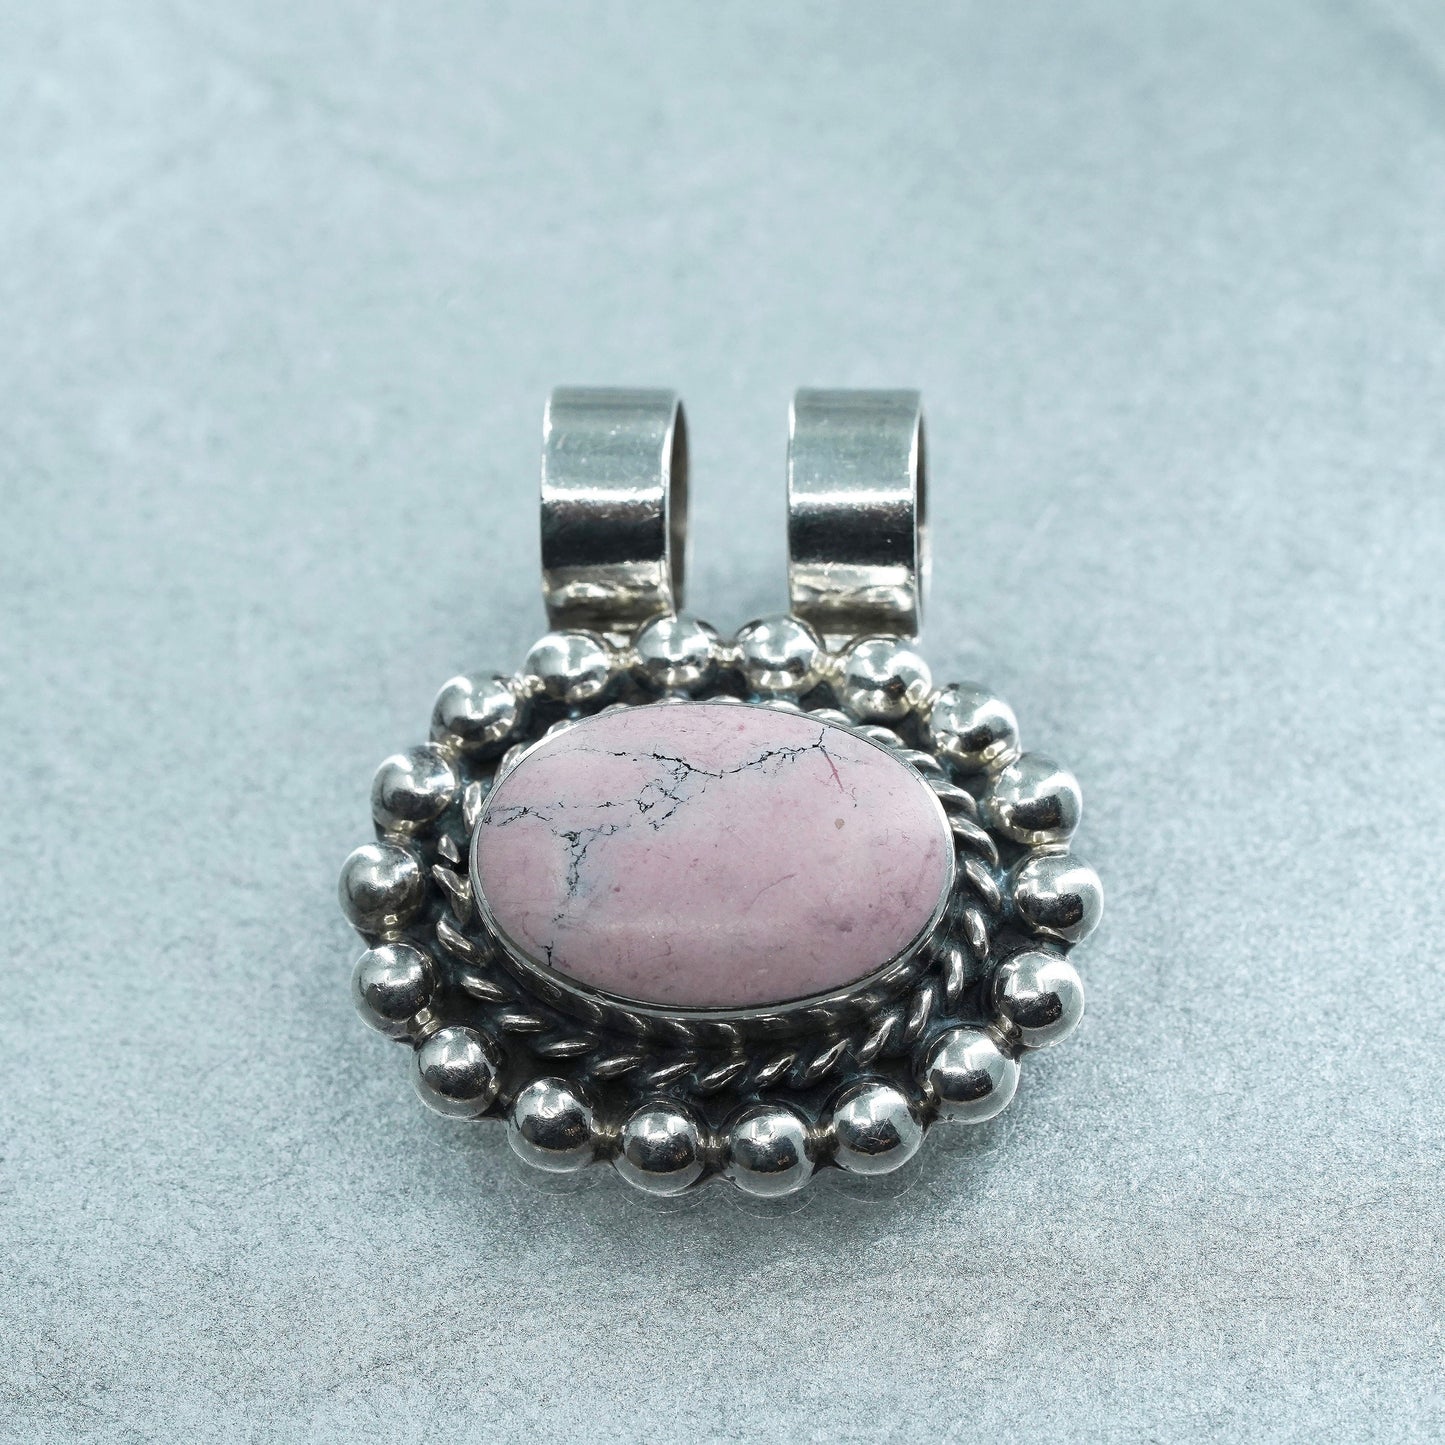 Vintage sterling 925 silver beads pendant with oval pink jasper and beads